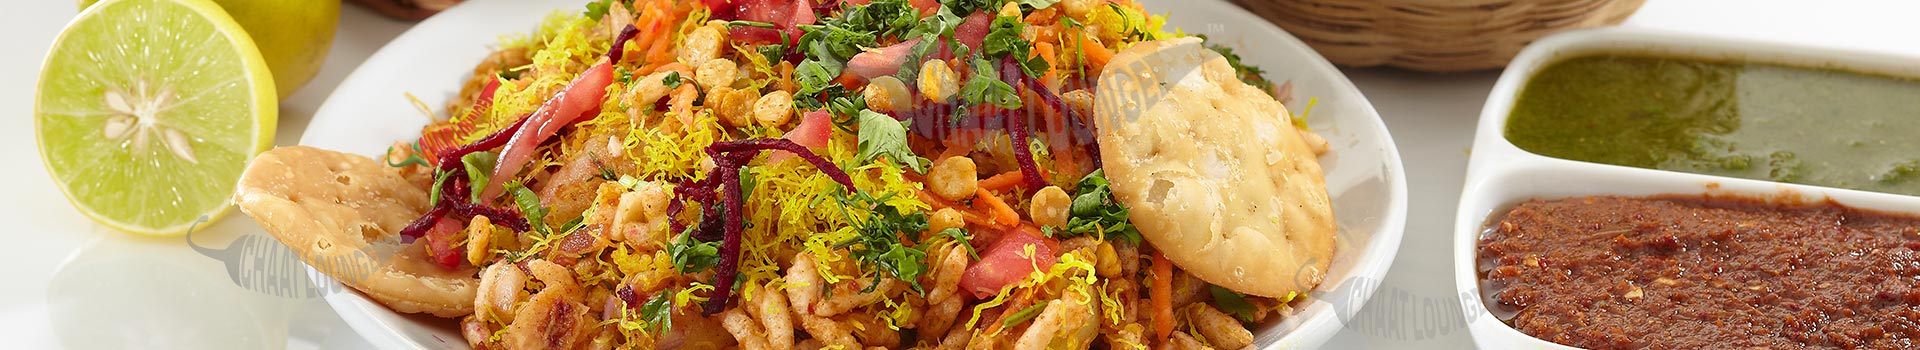 Chaat Menu, Fast Food Franchise India, Juices Franchise Menu, Milkshakes Franchise Menu